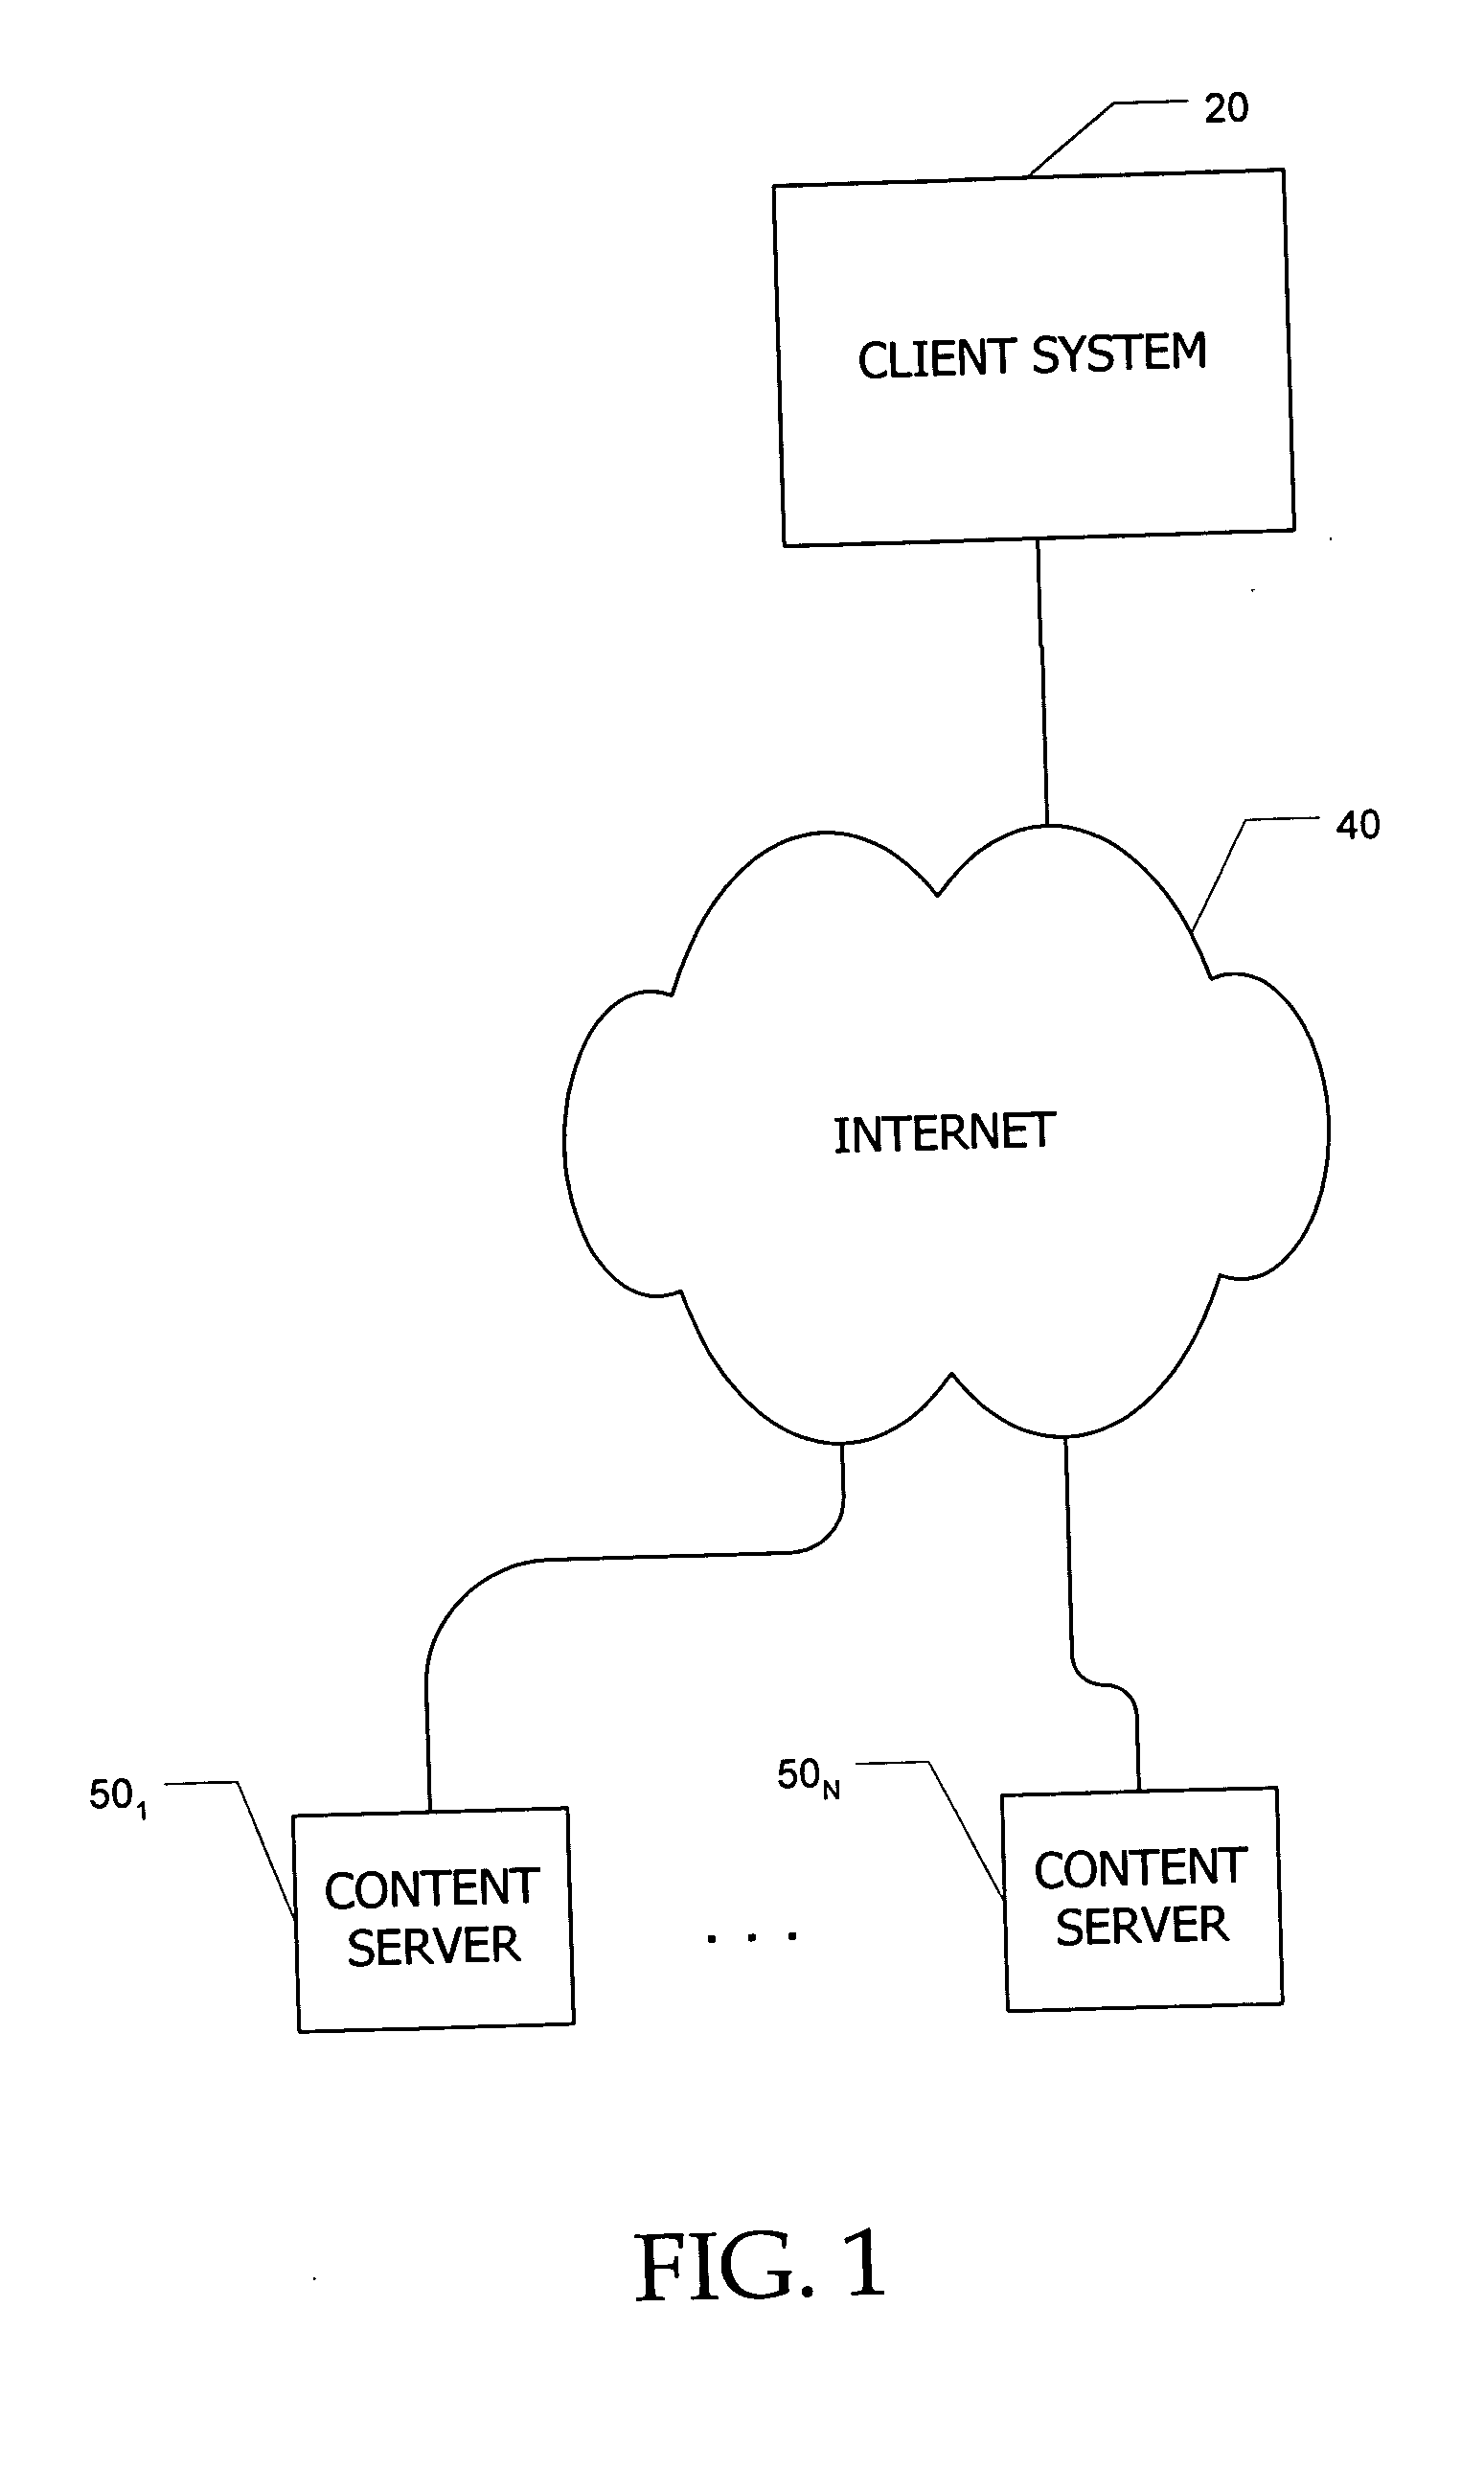 Search system and methods with integration of user annotations from a trust network